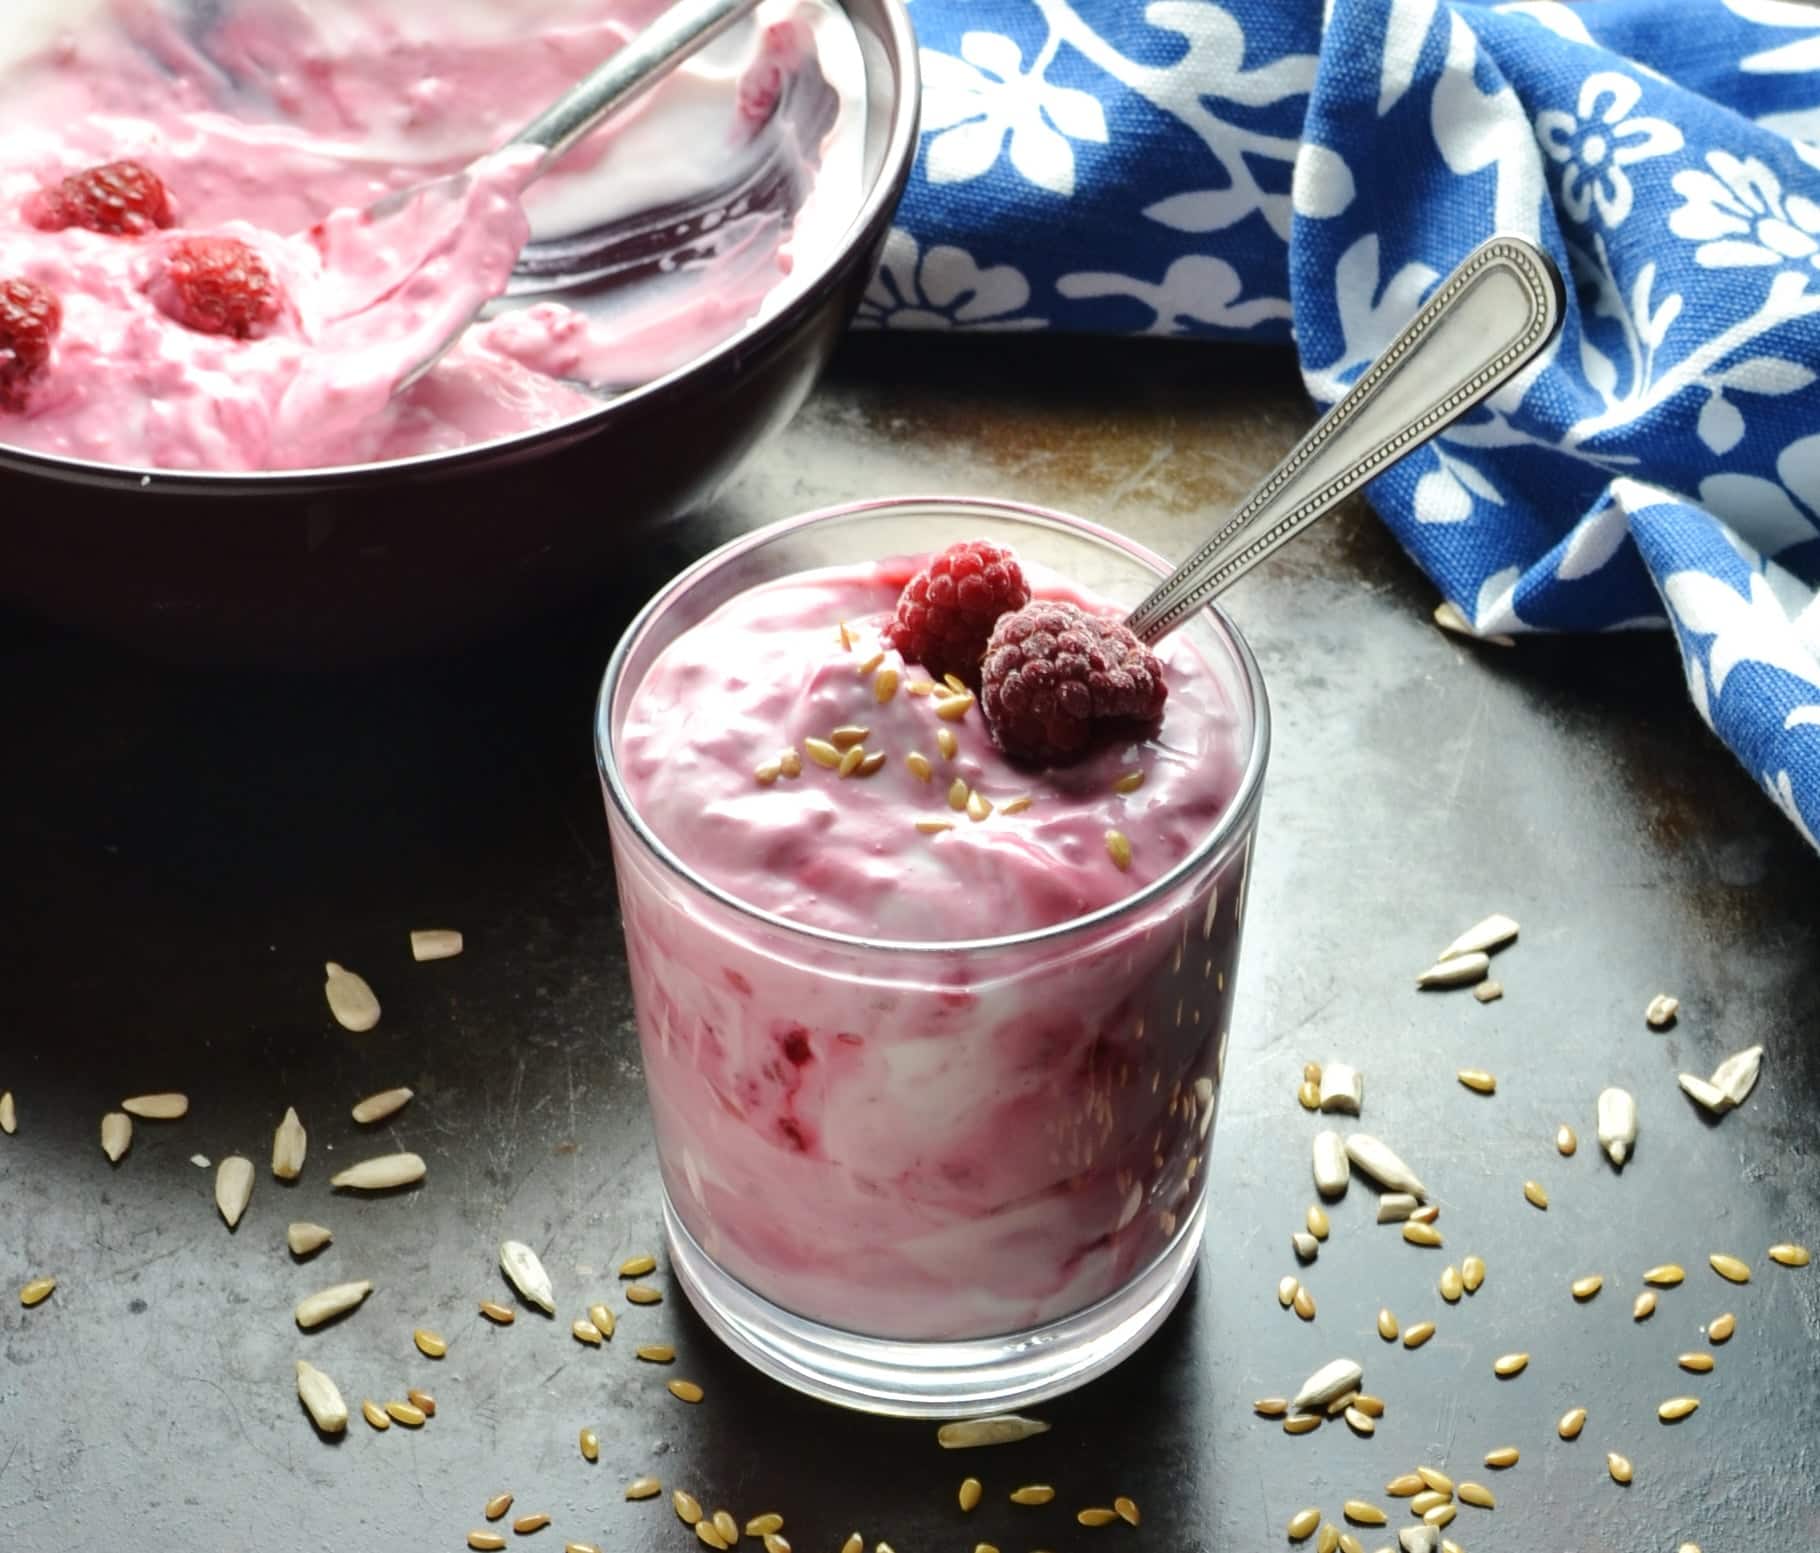 Flavoured raspberry yogurt in glass with spoon, bowl and blue-and-white cloth in background.